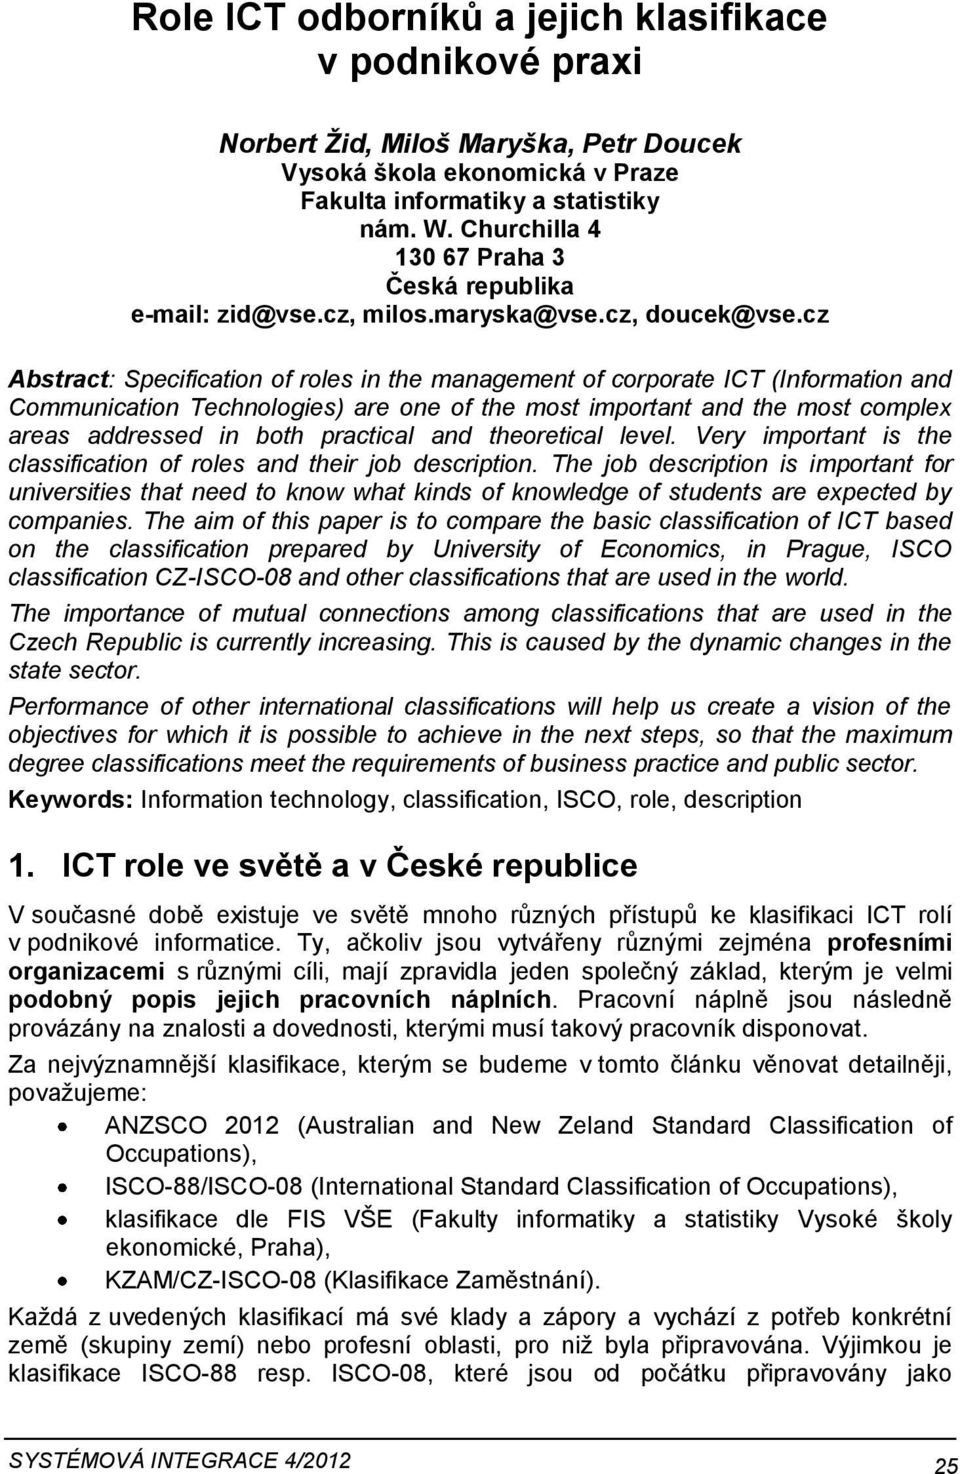 cz Abstract: Specification of roles in the management of corporate ICT (Information and Communication Technologies) are one of the most important and the most complex areas addressed in both